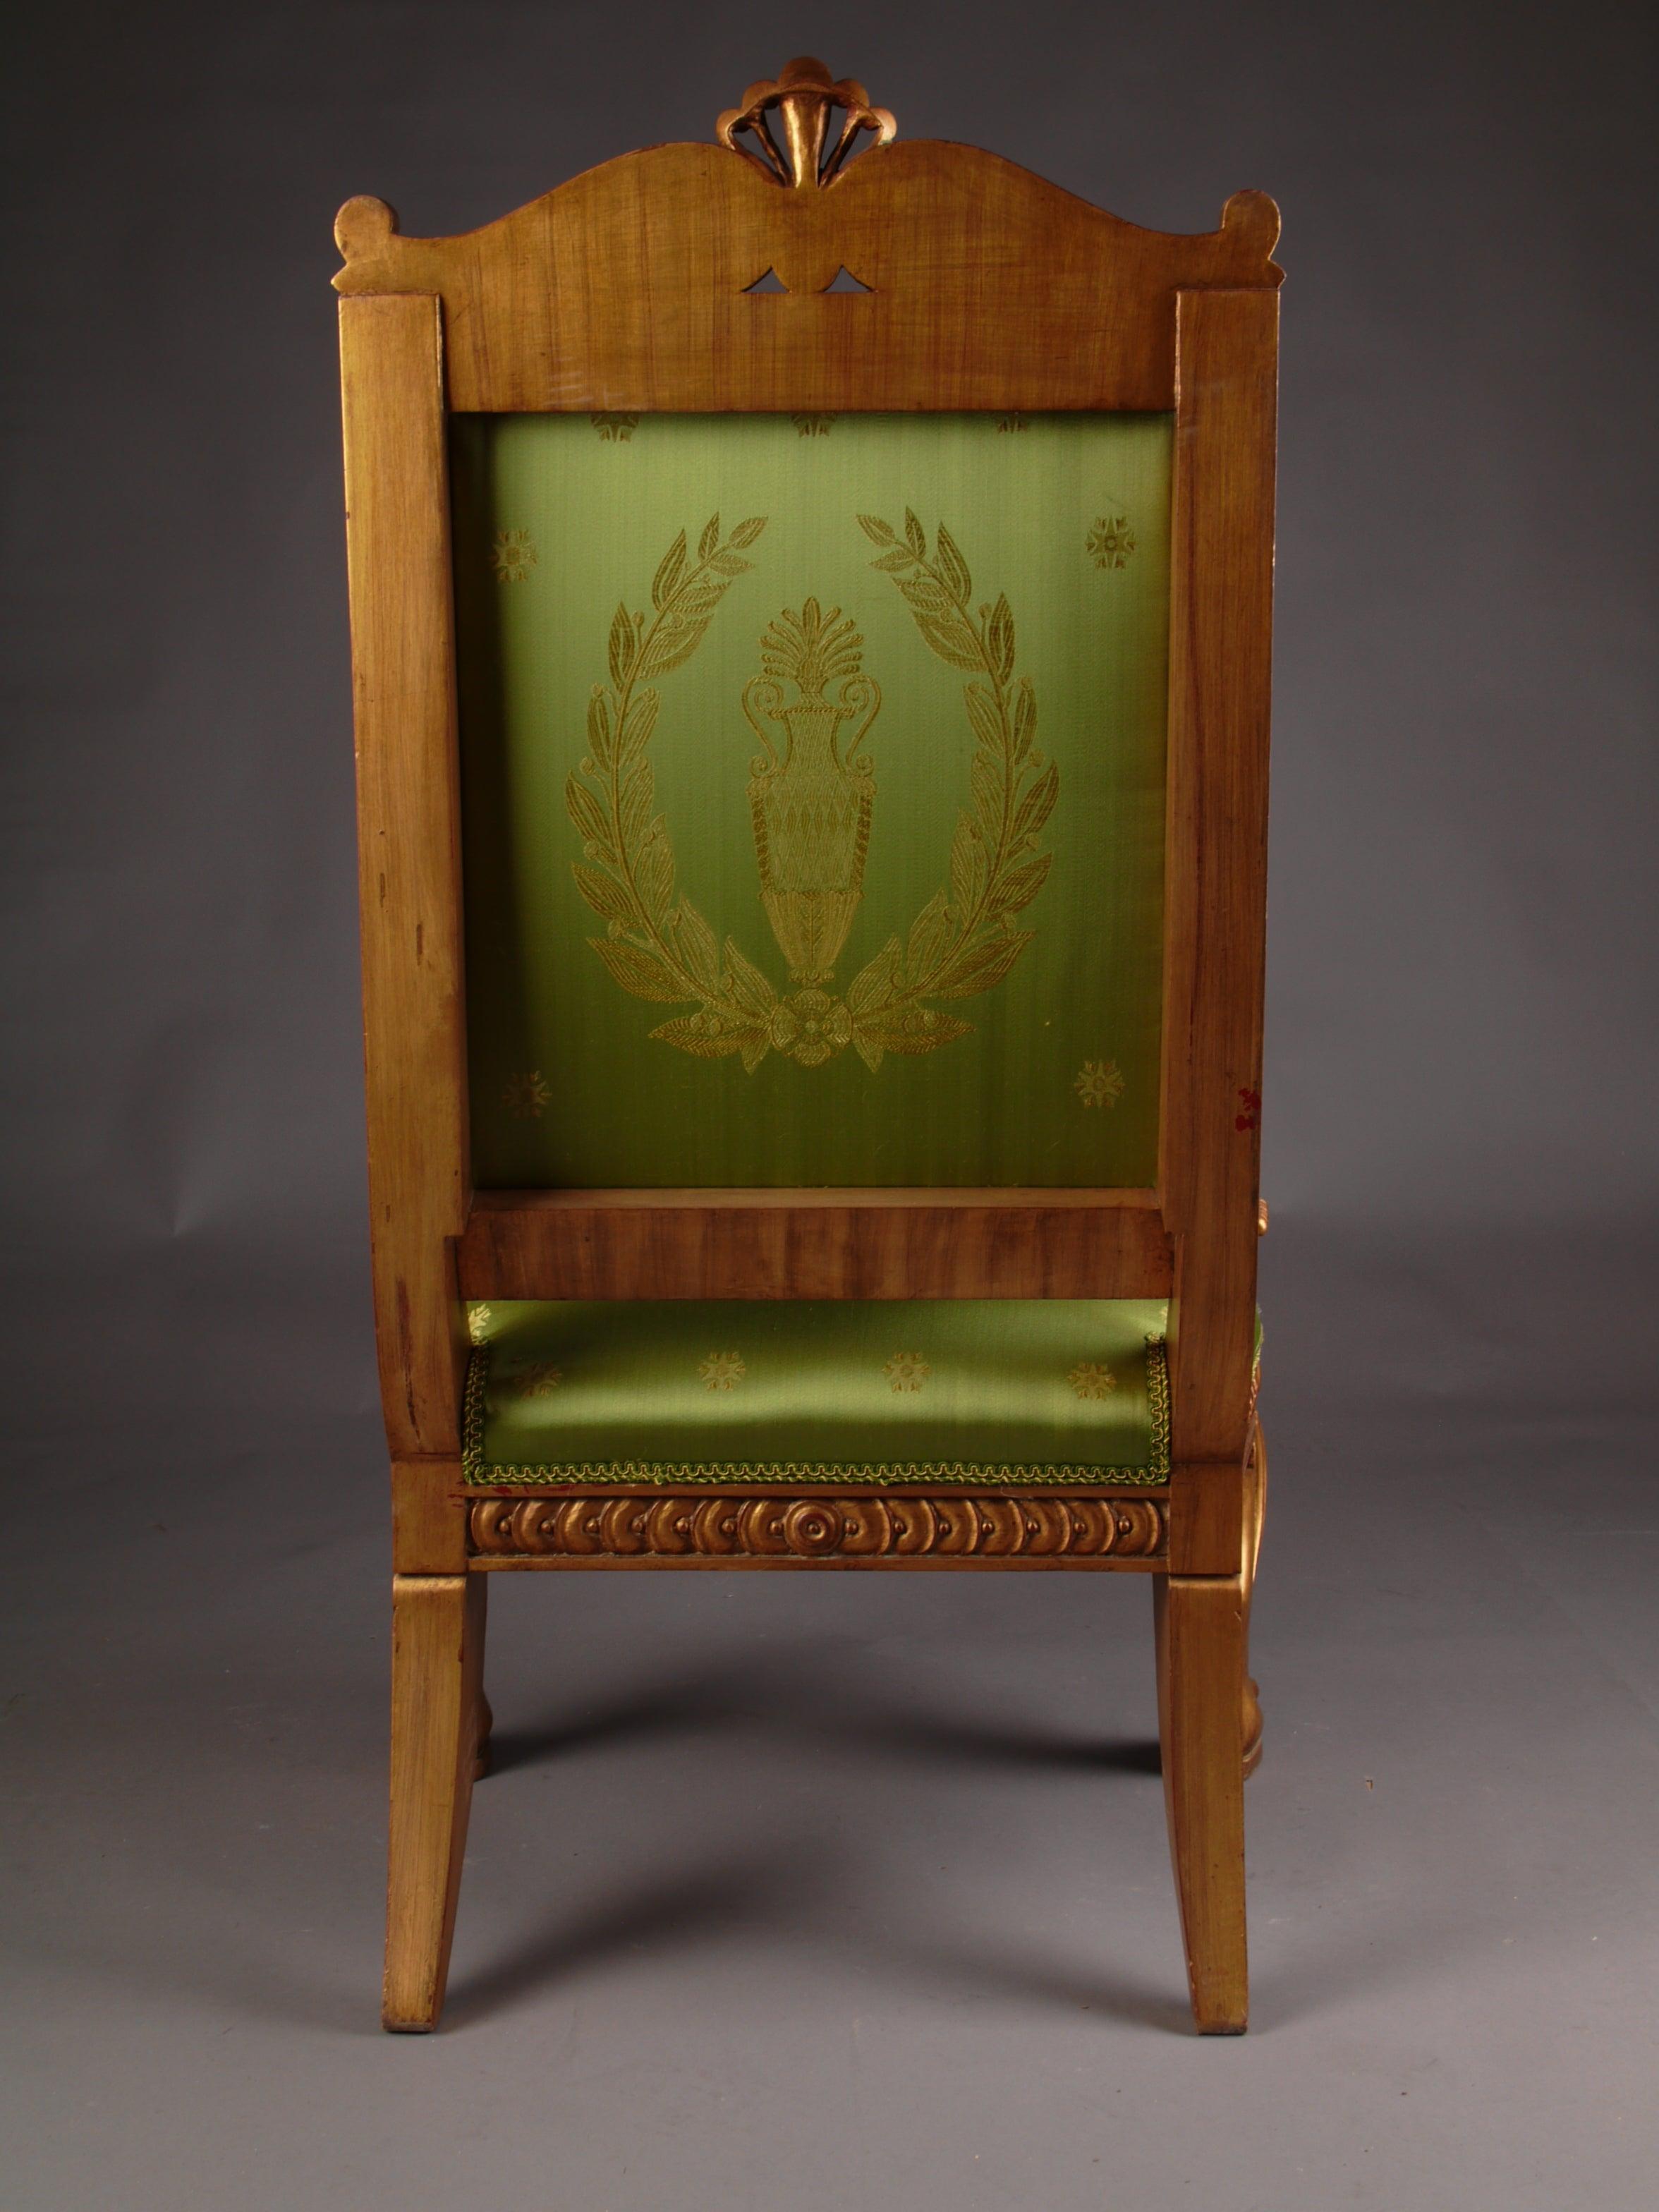 20th Century Napoleonic Swan Chair in the Empire Style Beechwood Poliment Gilded For Sale 5